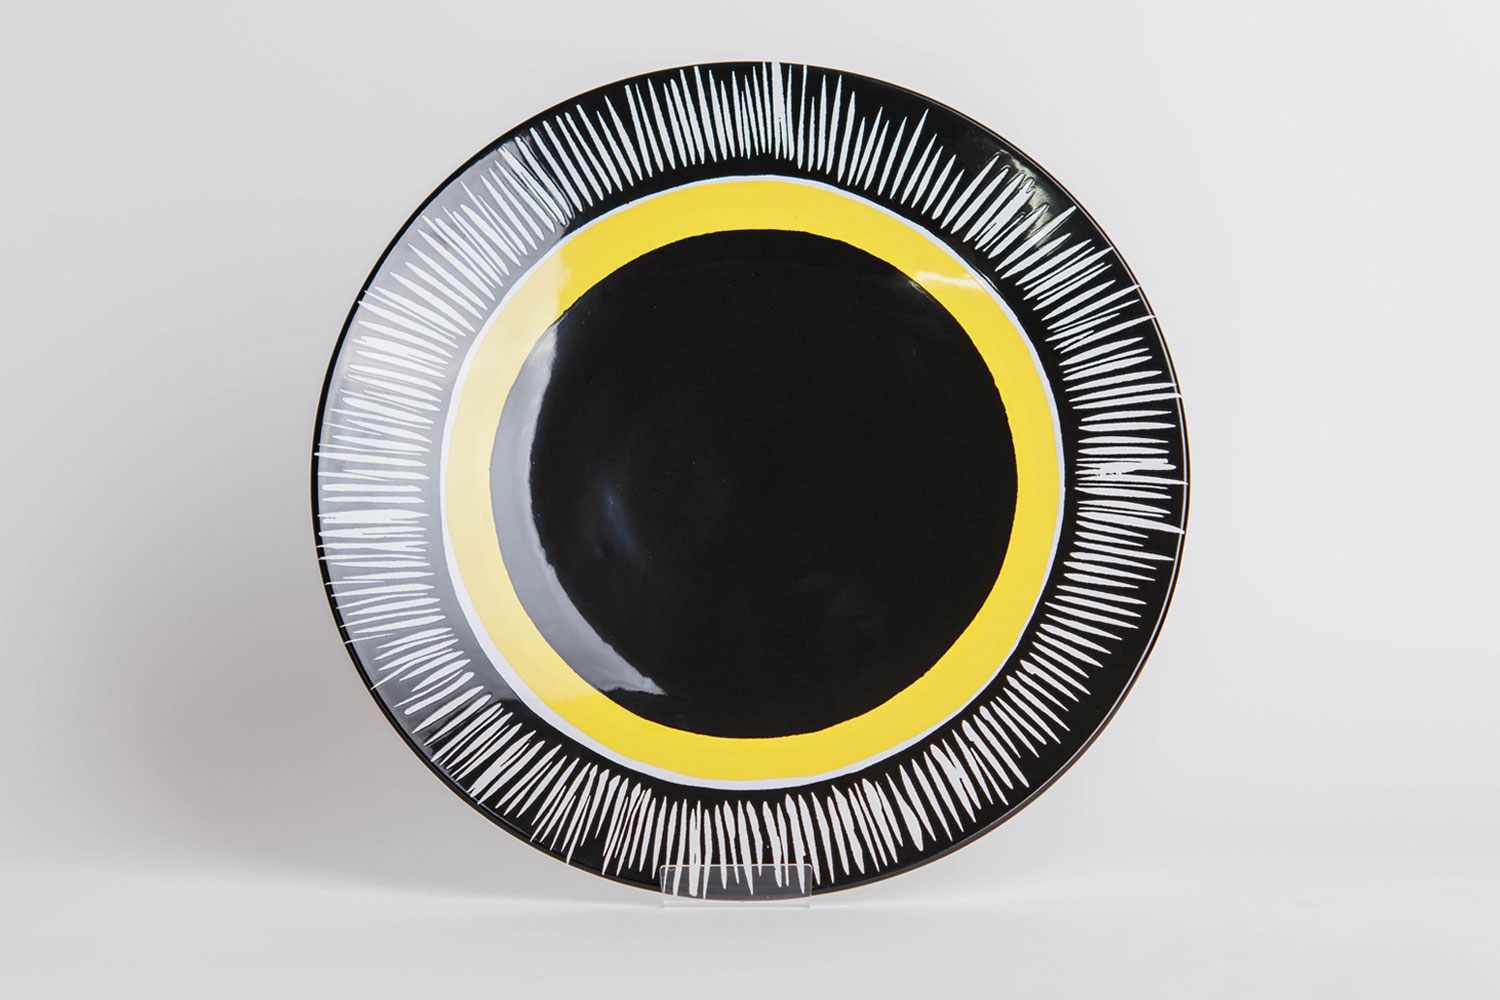 Trewellard Suns, No 4, 1990 – Limited Edition Ceramic Platter by Terry Frost